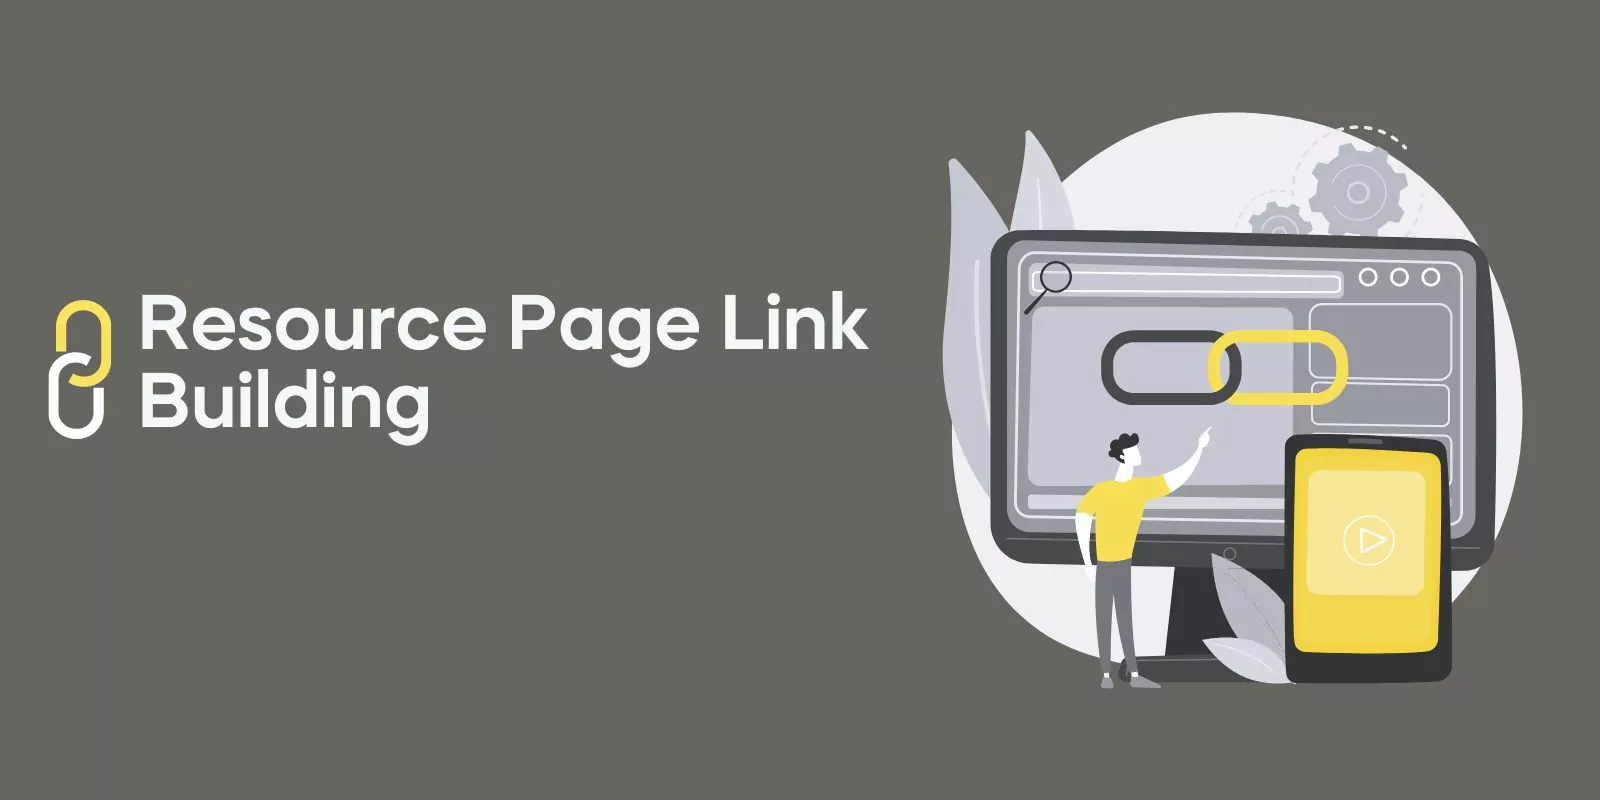 Resource Page Link Building